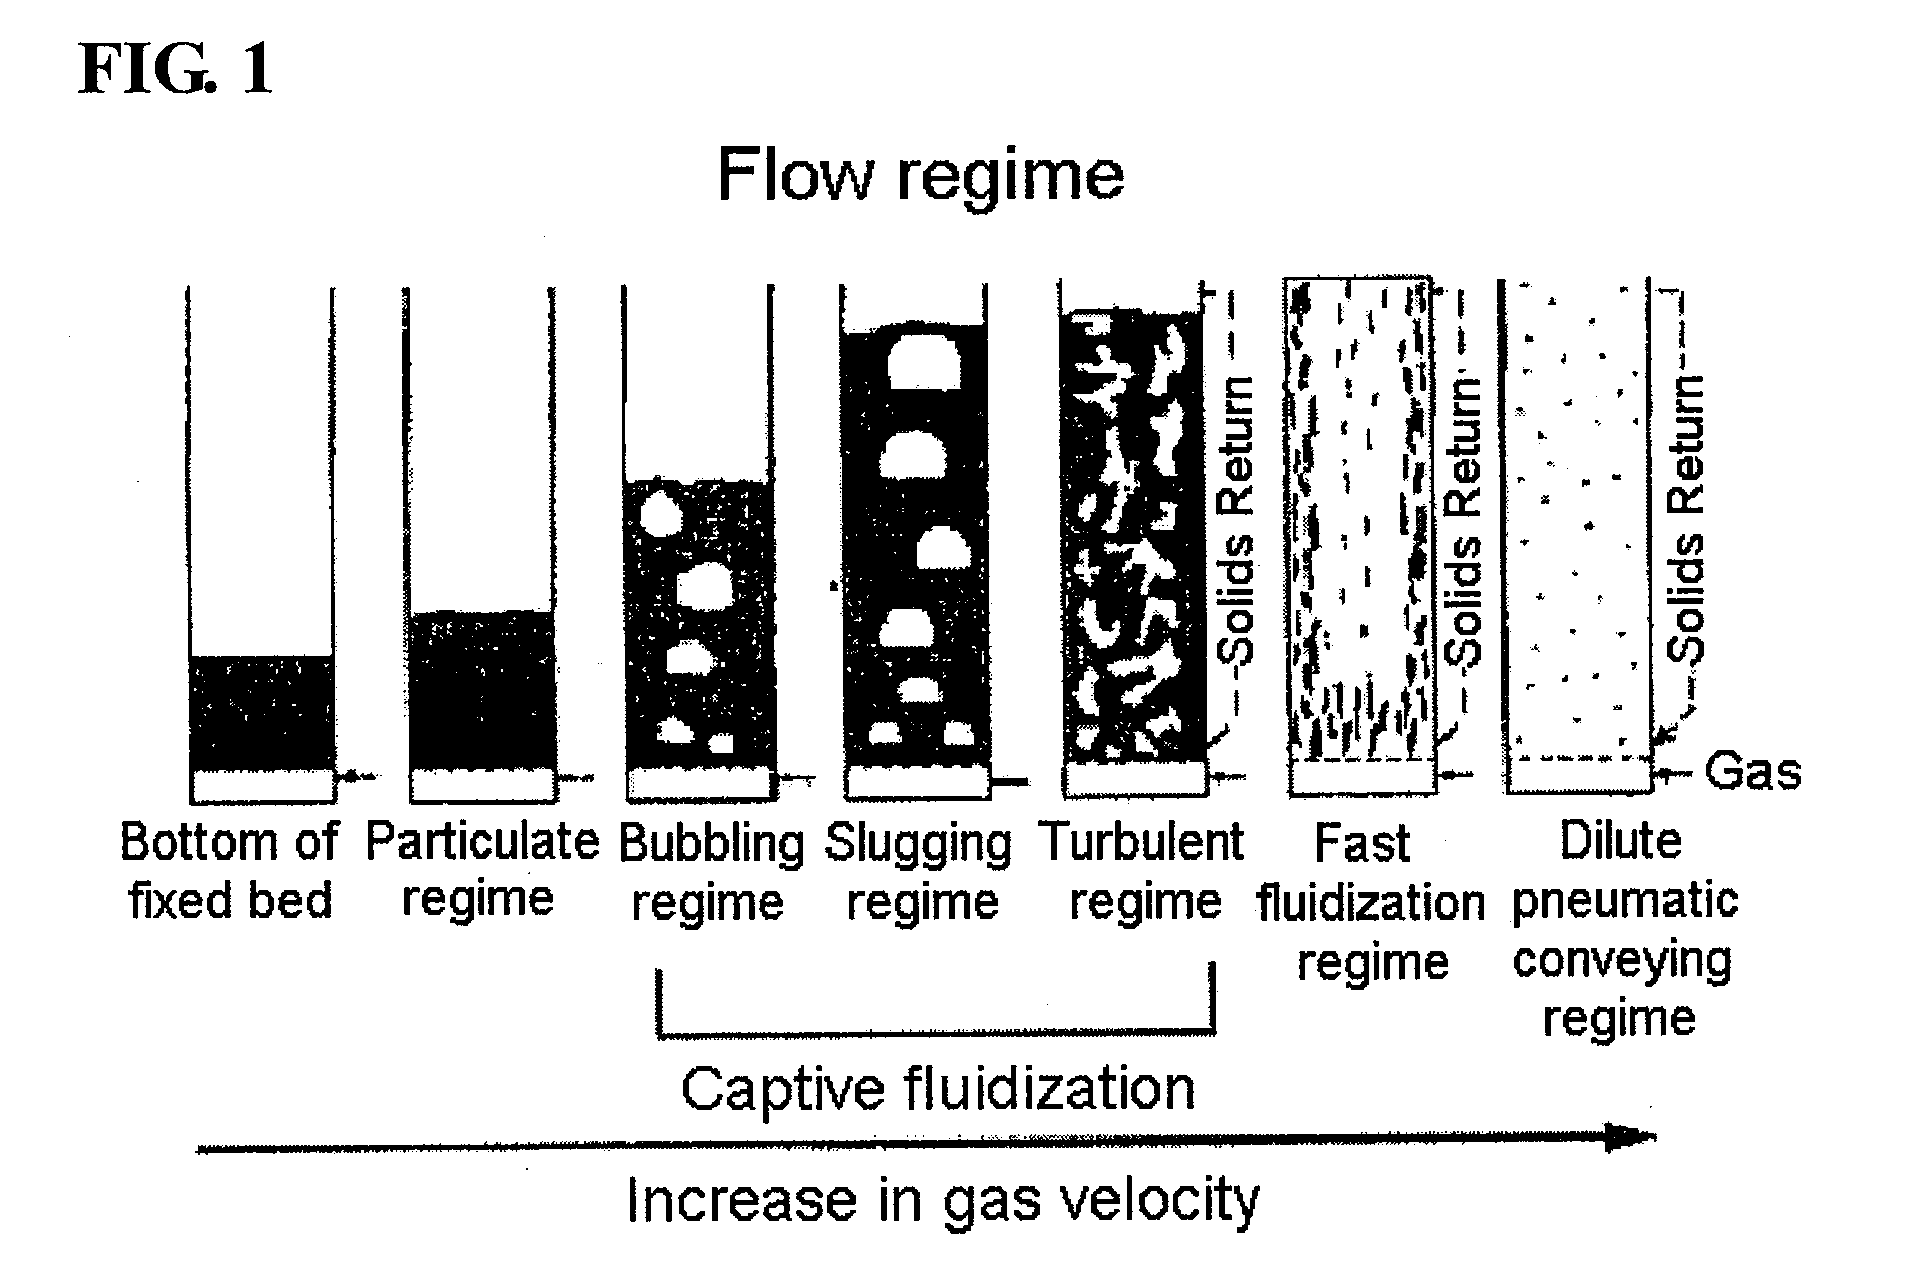 Catalytic Cracking Process Using Fast Fluidization for the Production of Light Olefins from Hydrocarbon Feedstock